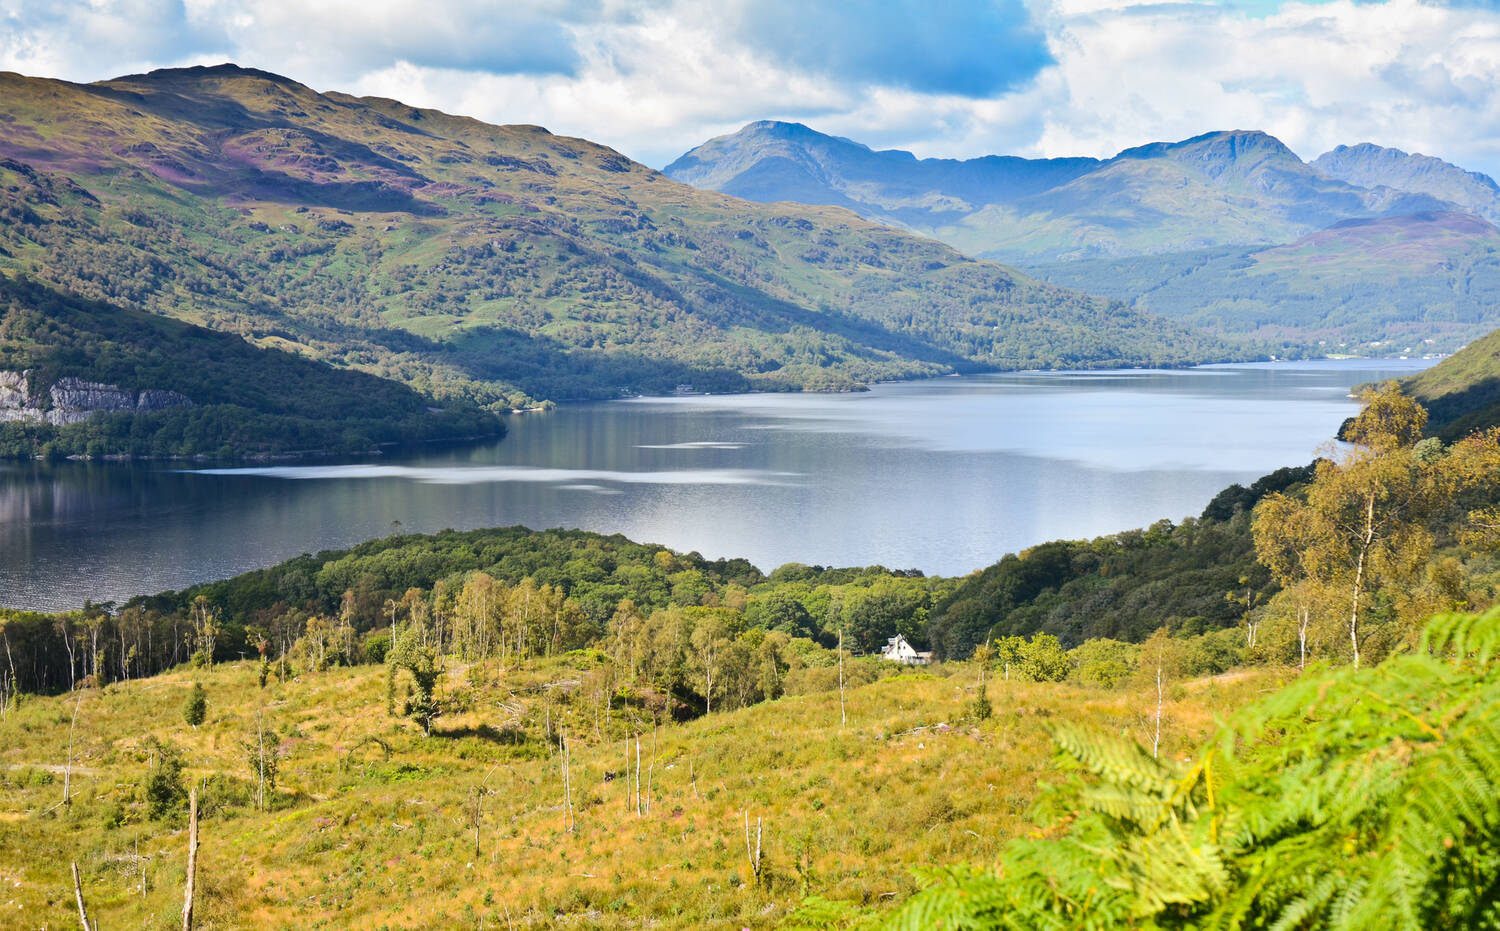 Looking down over Loch Lomond from the slopes of Ben Lomond